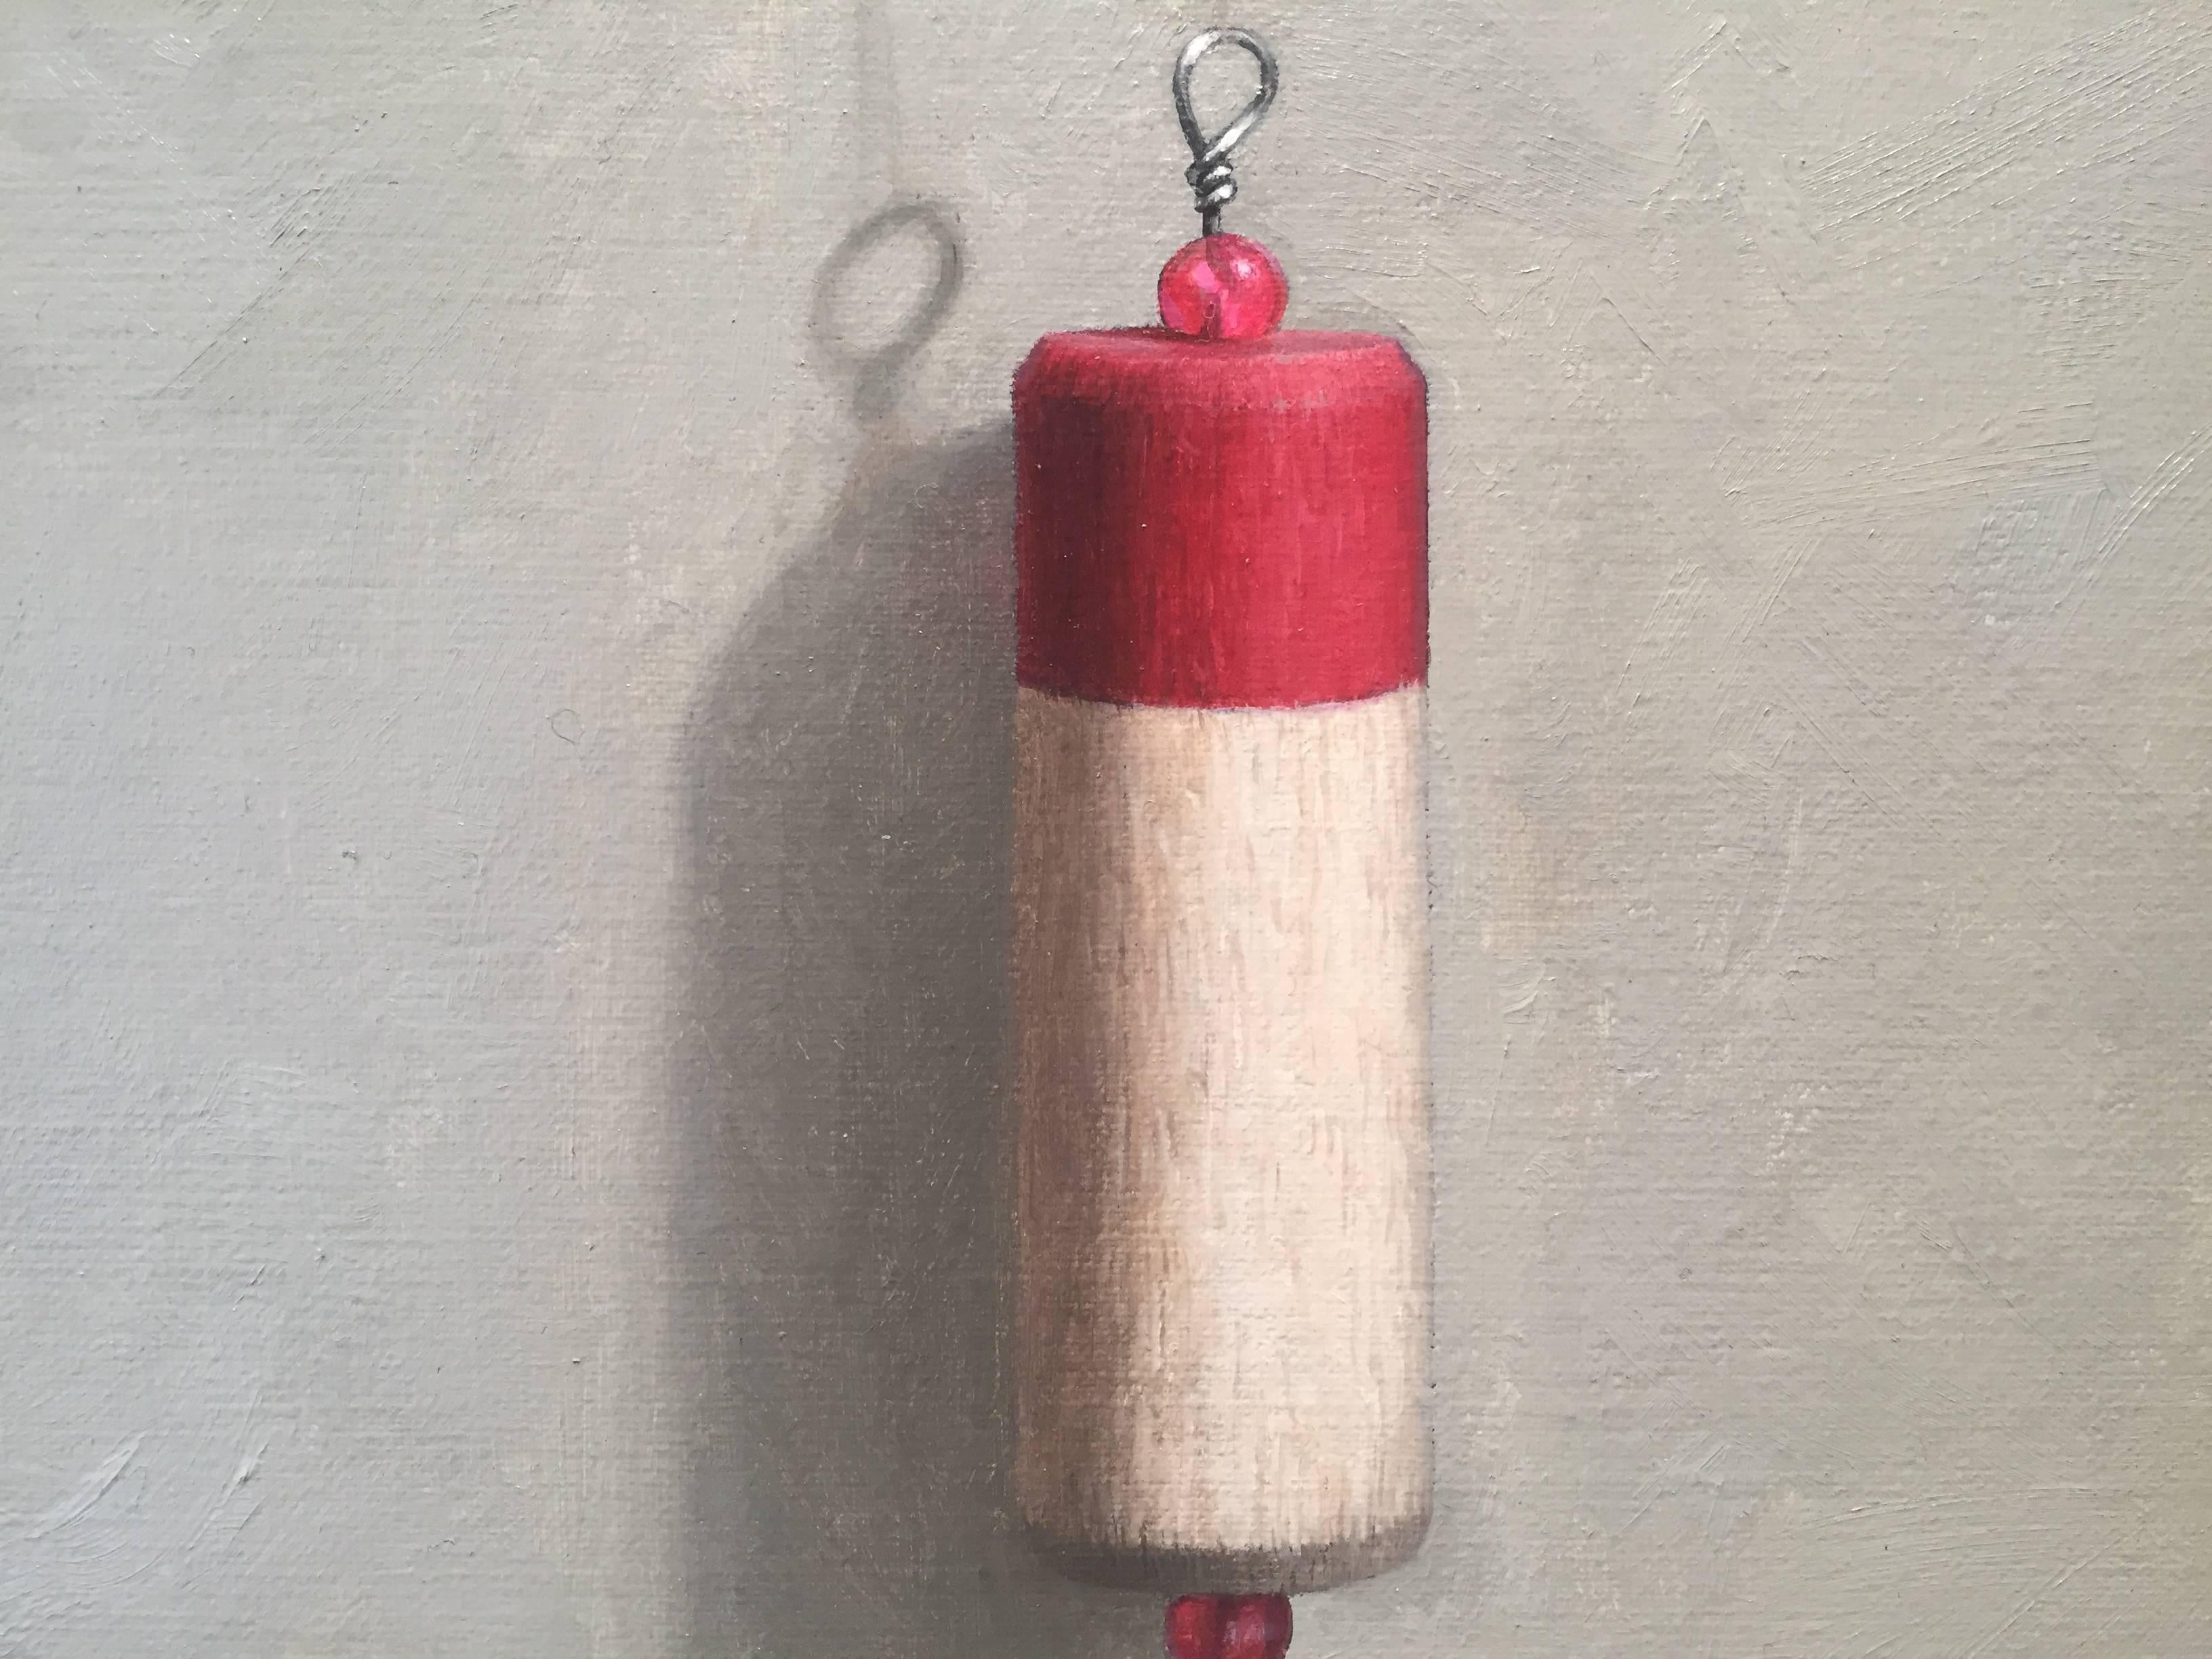 Painted from life in his Connecticut studio, John Morfis paints a red and white fishing bobber in front of a grey backdrop. Hanging from a tiny nail and a near invisible fishing wire, Morfis presents his aptitude for intricacy. 

John Morfis was